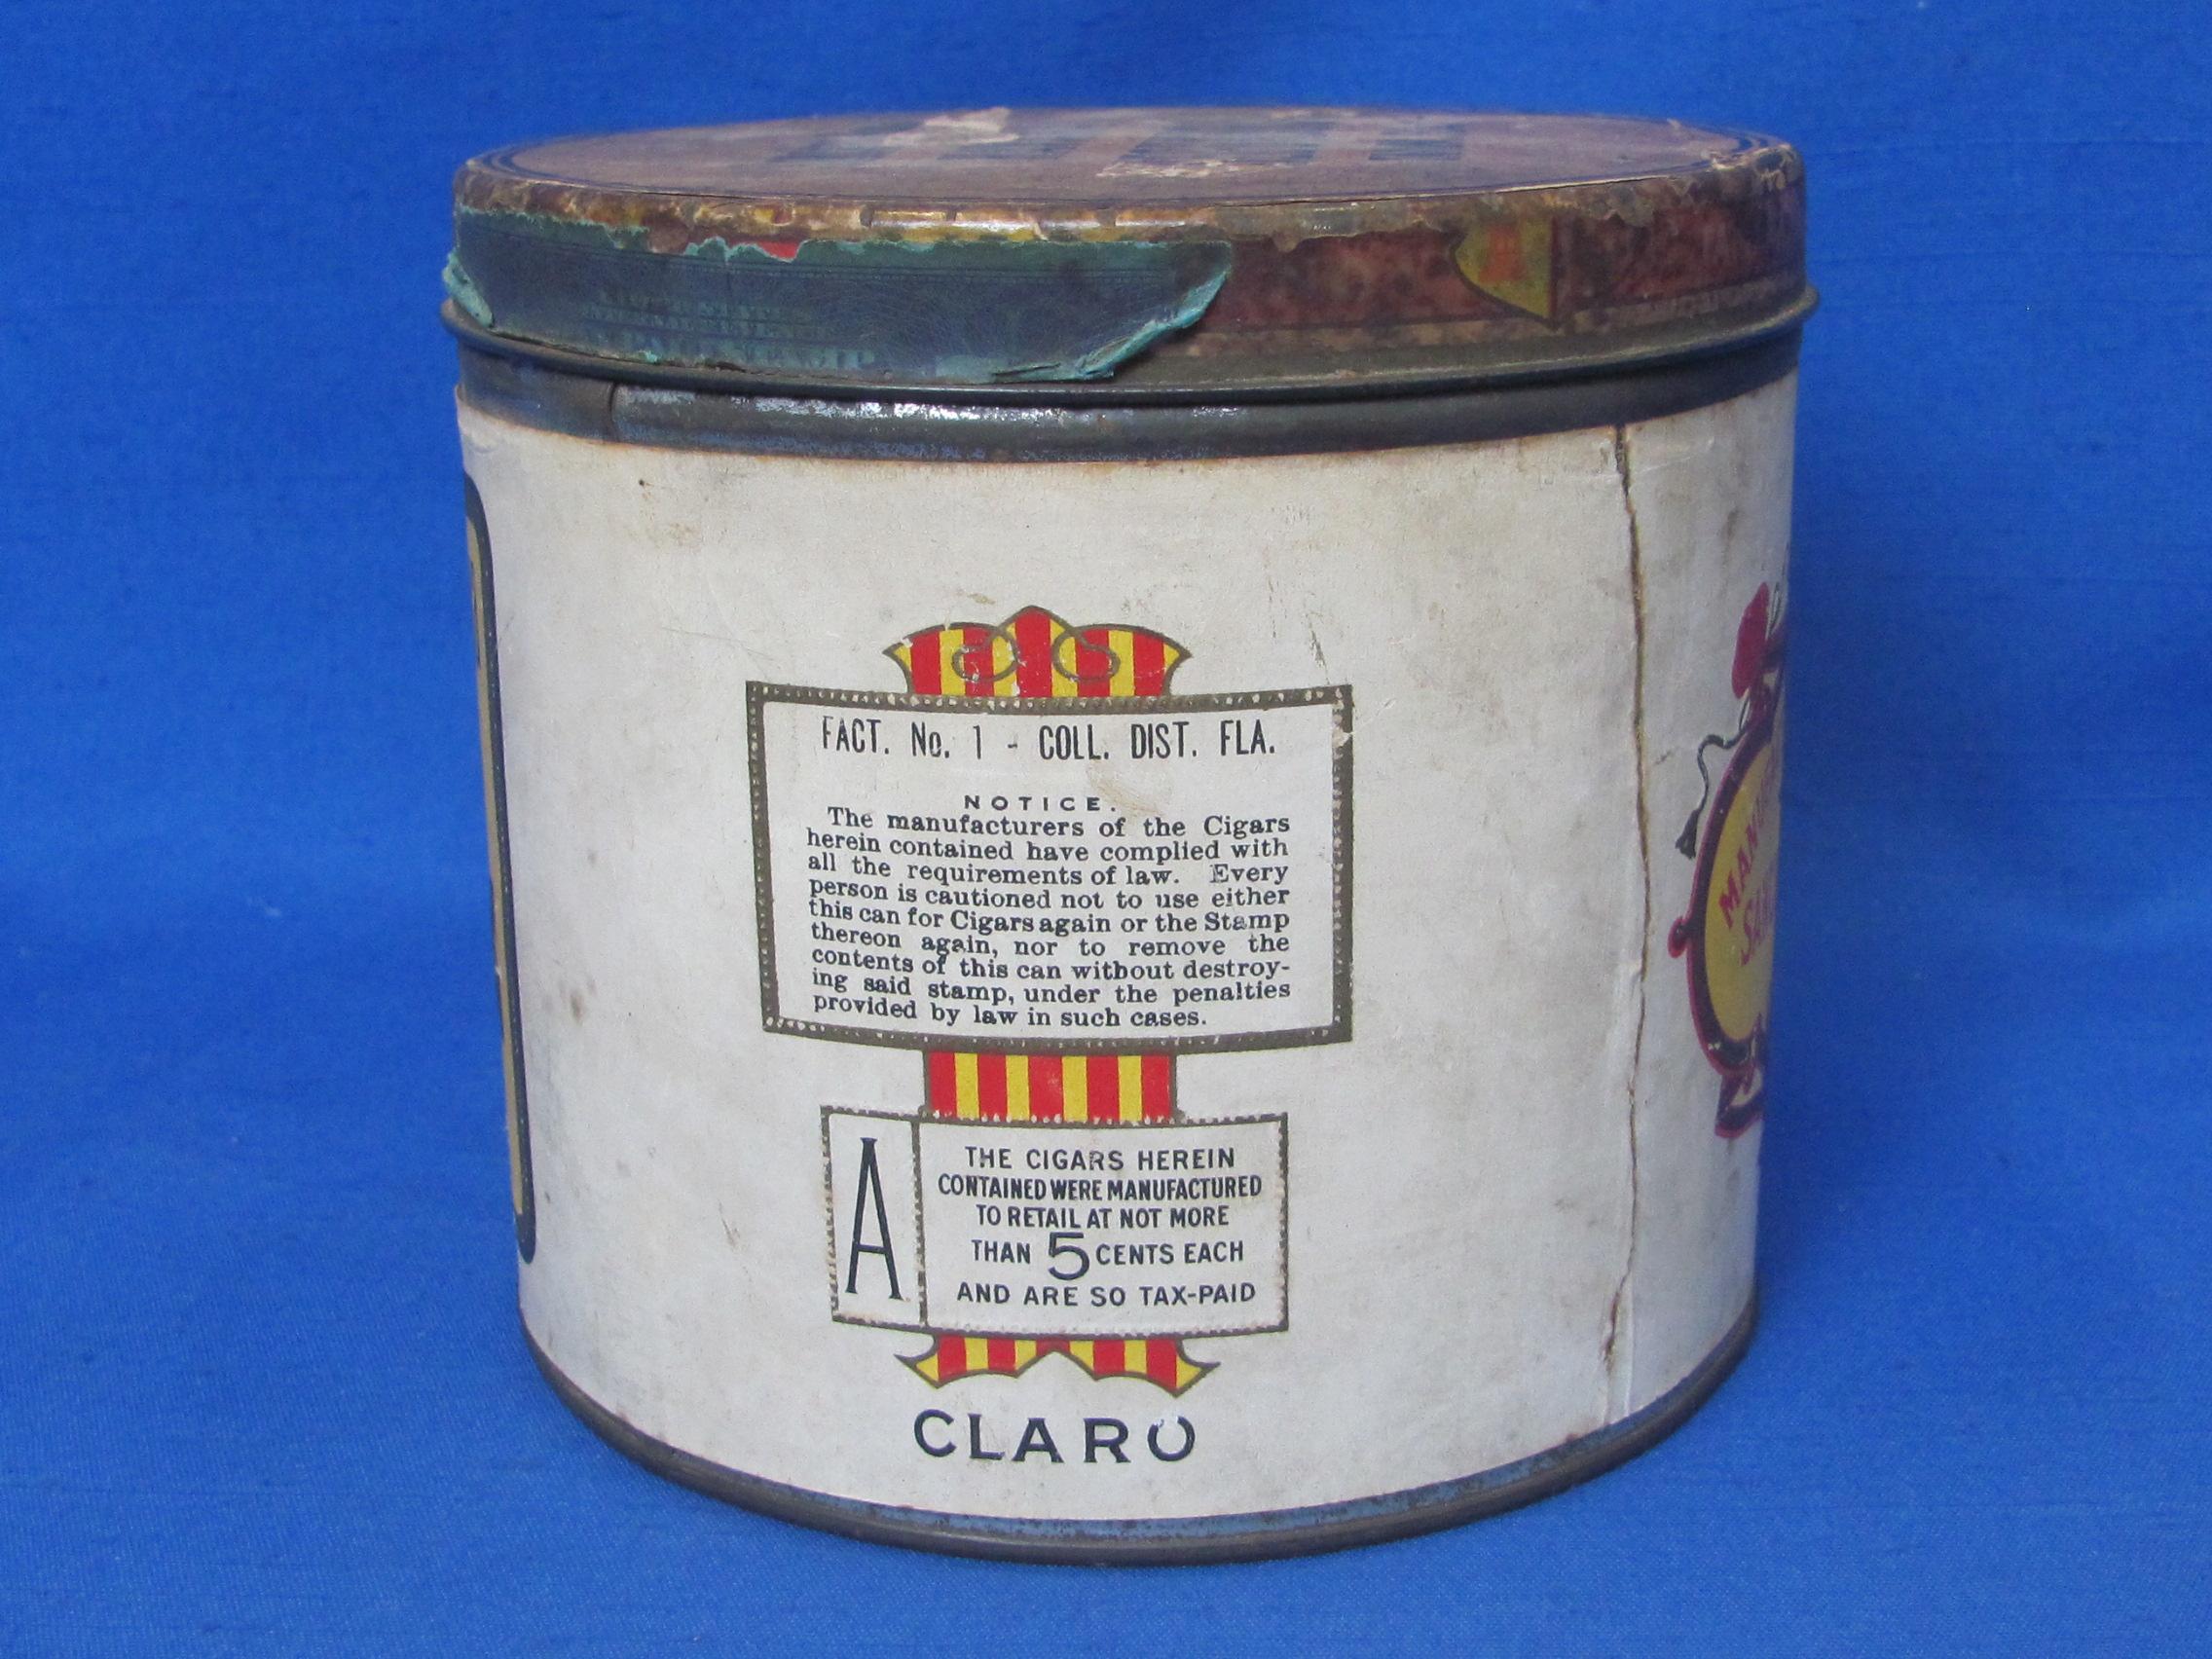 Round Cigar Tin with Paper Label “Sanchez & Haya Co. Tampa, Fla.”  4 3/4” tall – 5 1/4” in diameter